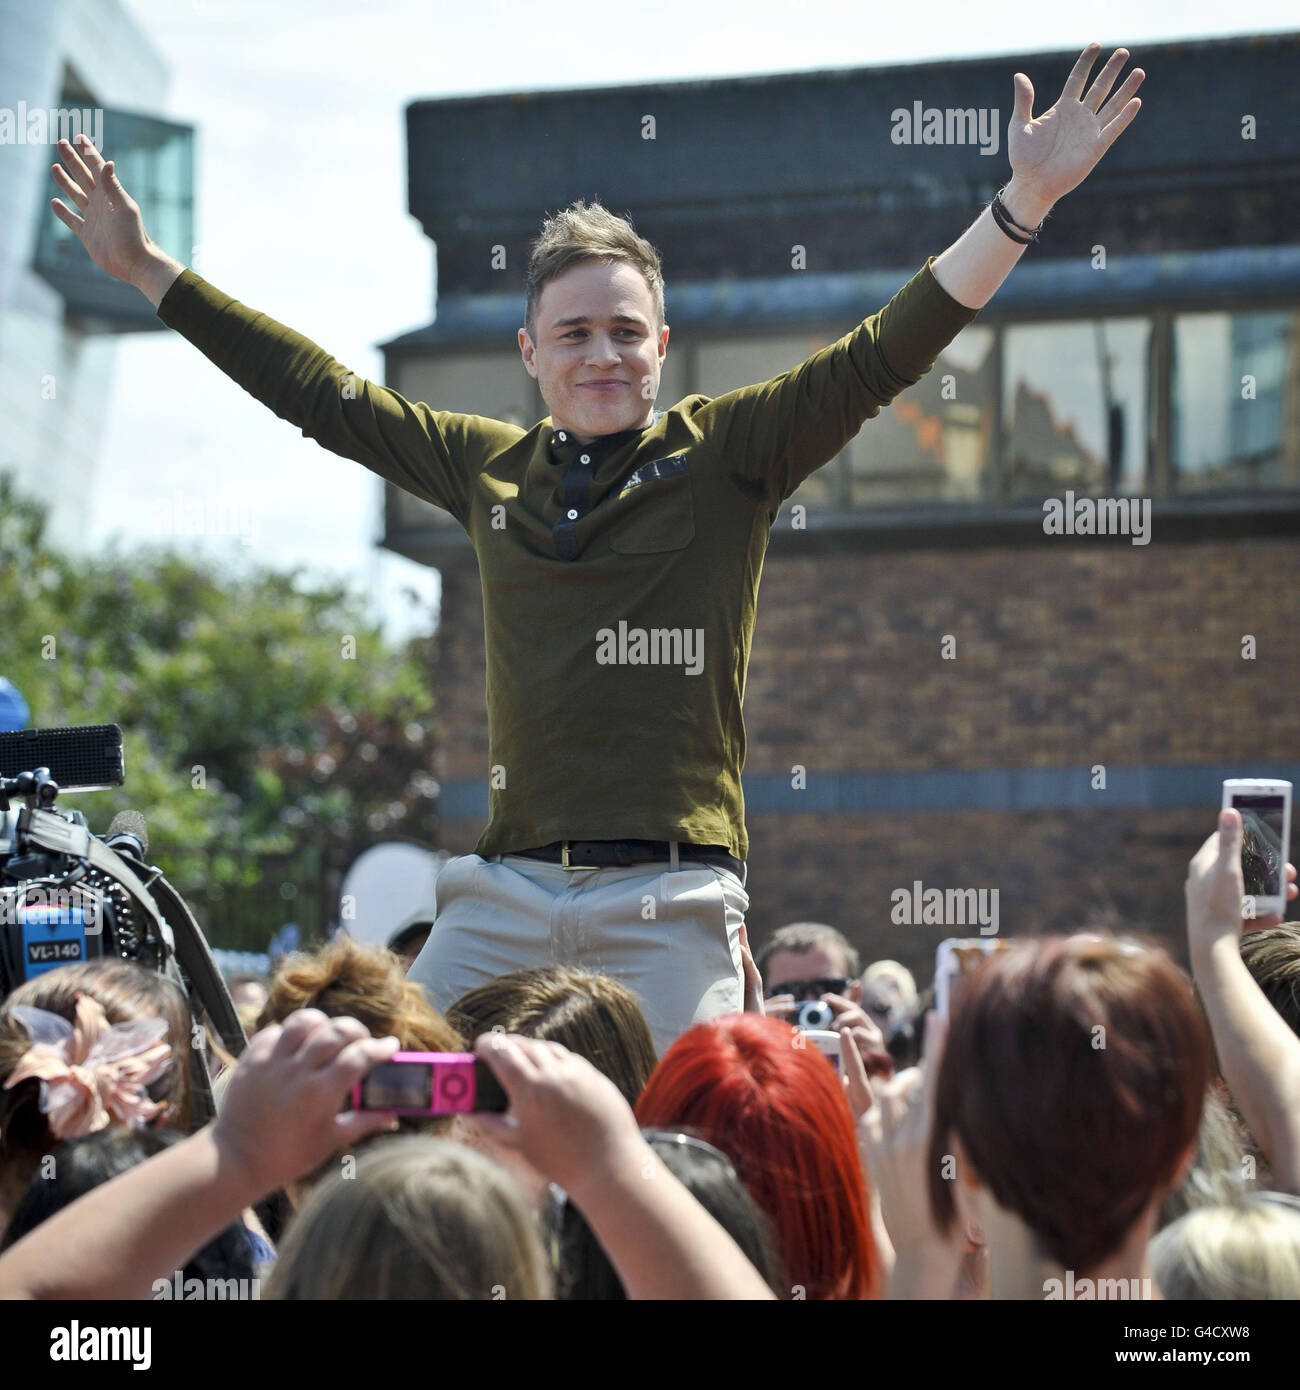 X Factor auditions - Cardiff. Xtra factor presenter Olly Murs in Cardiff, Wales, where X-Factor auditions are taking place. Stock Photo